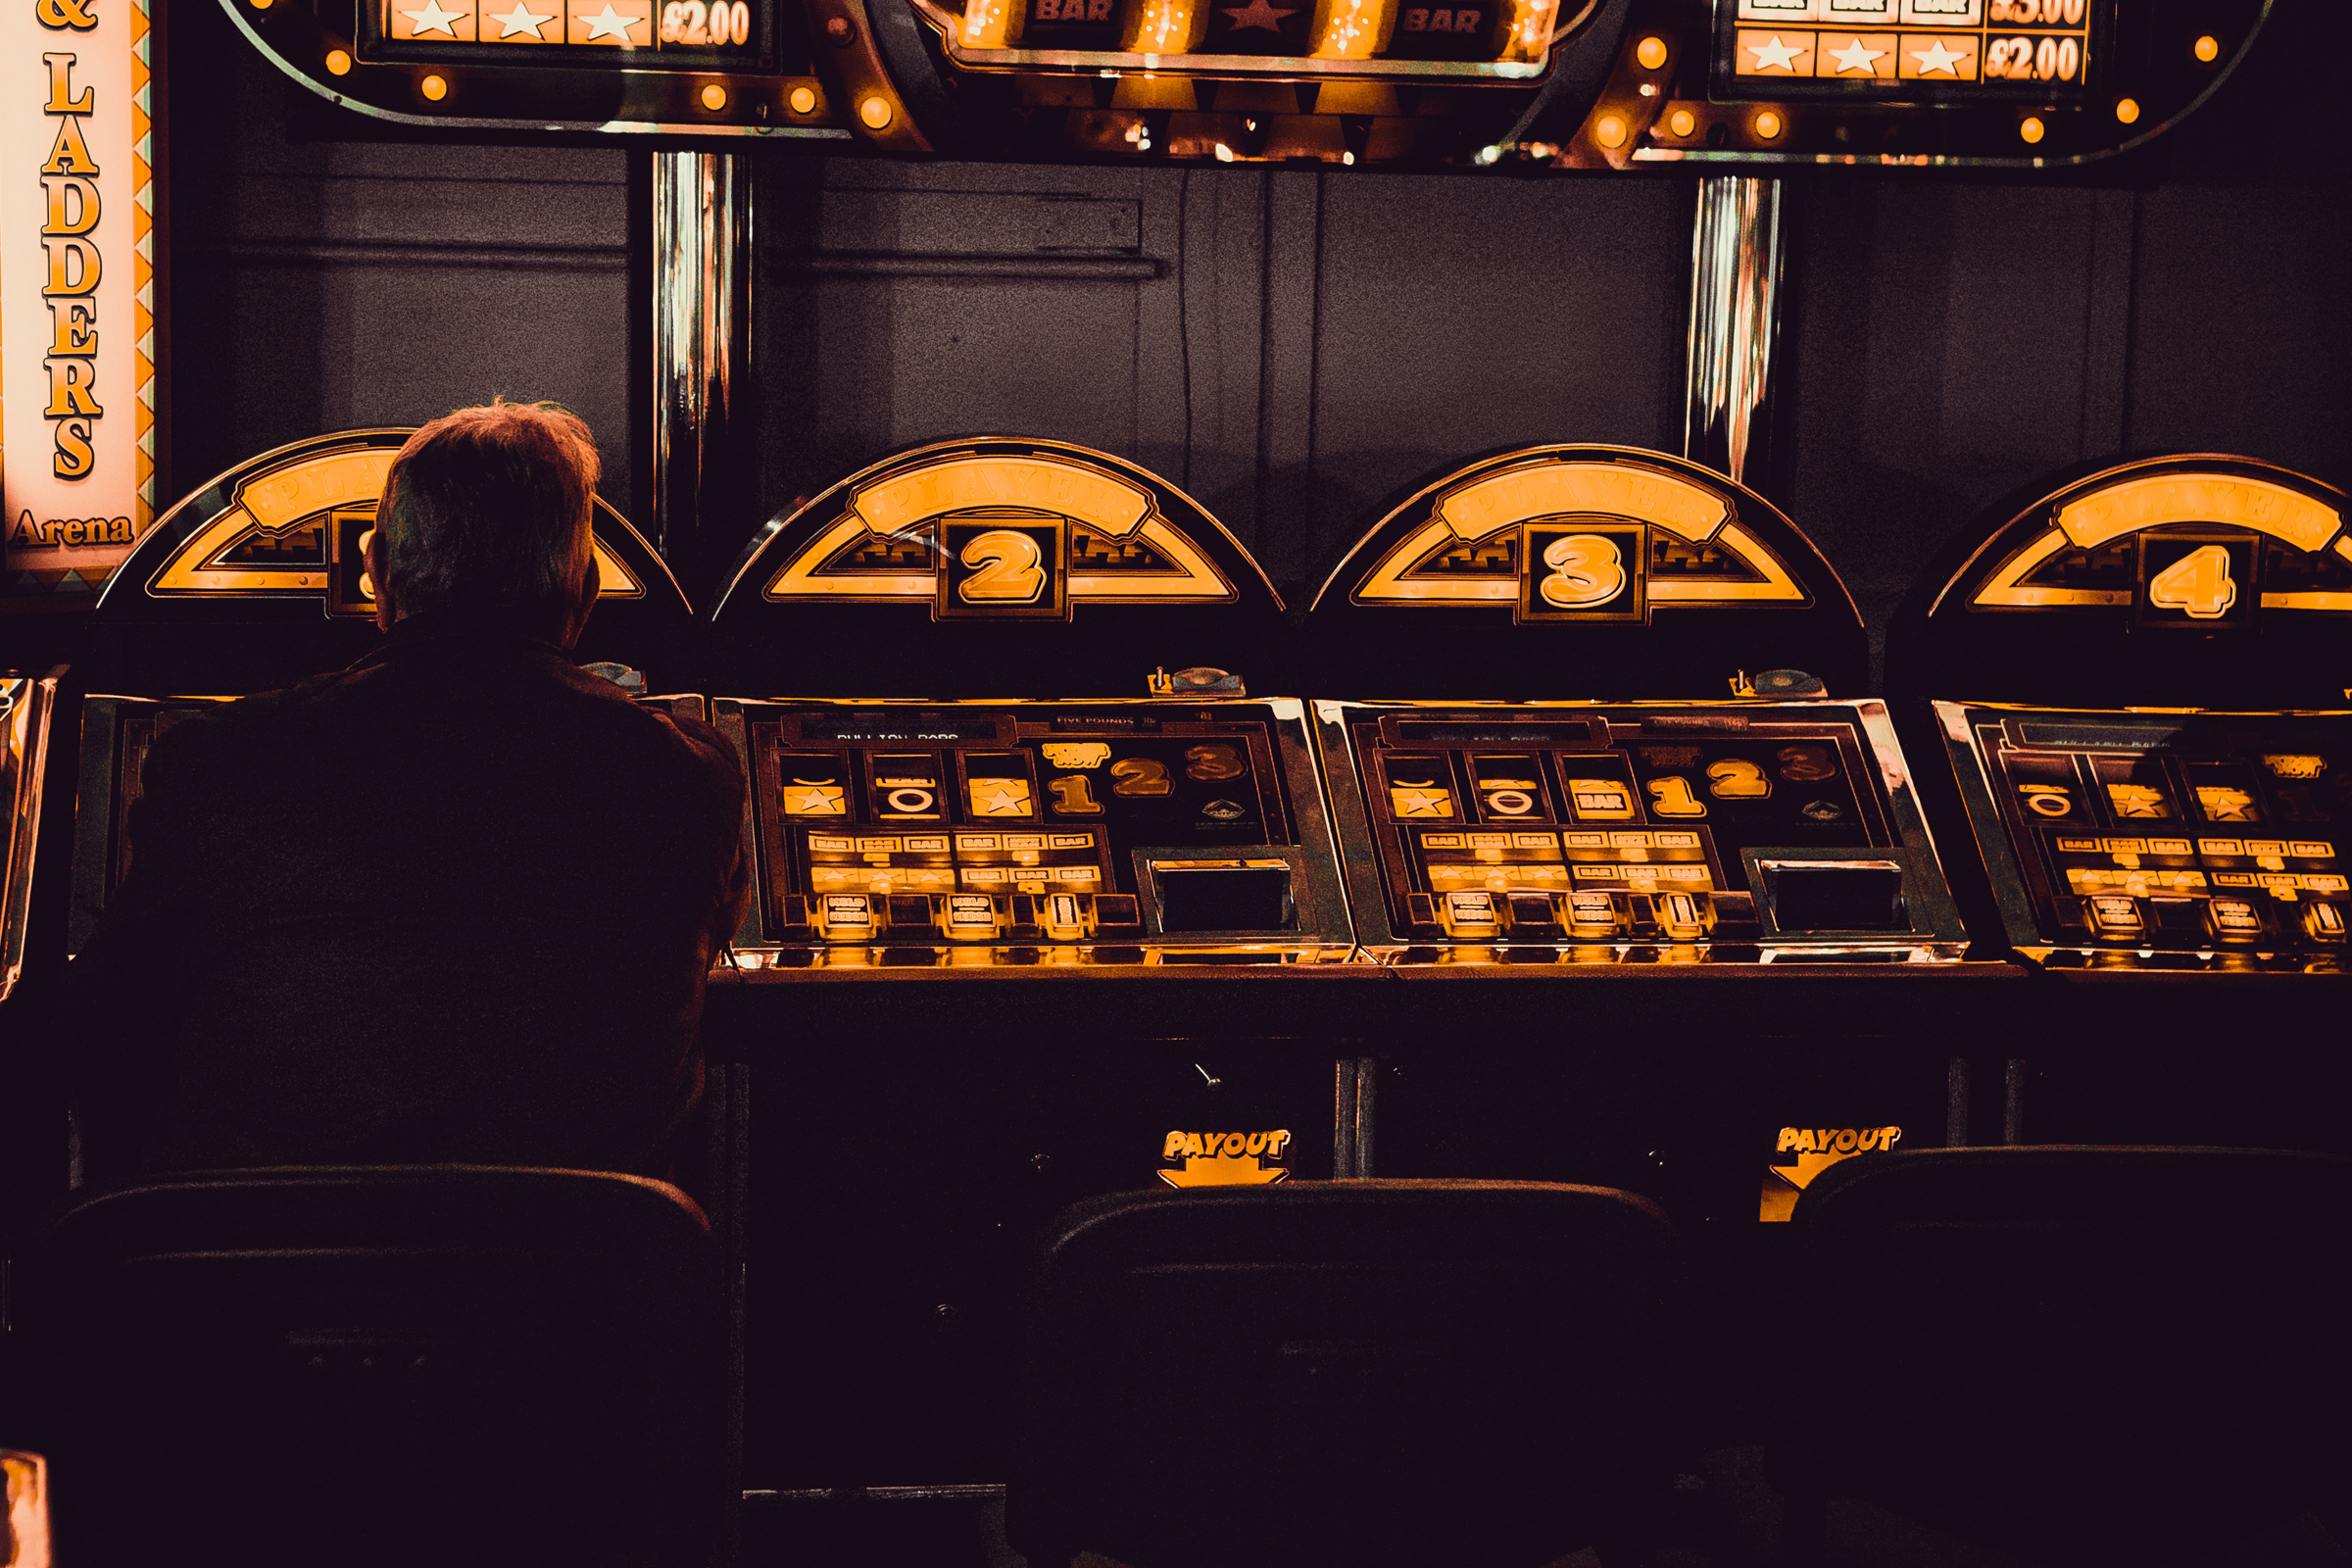 A lone gambler playing one of a group of slot machines (Photo by Carl Raw on Unsplash)